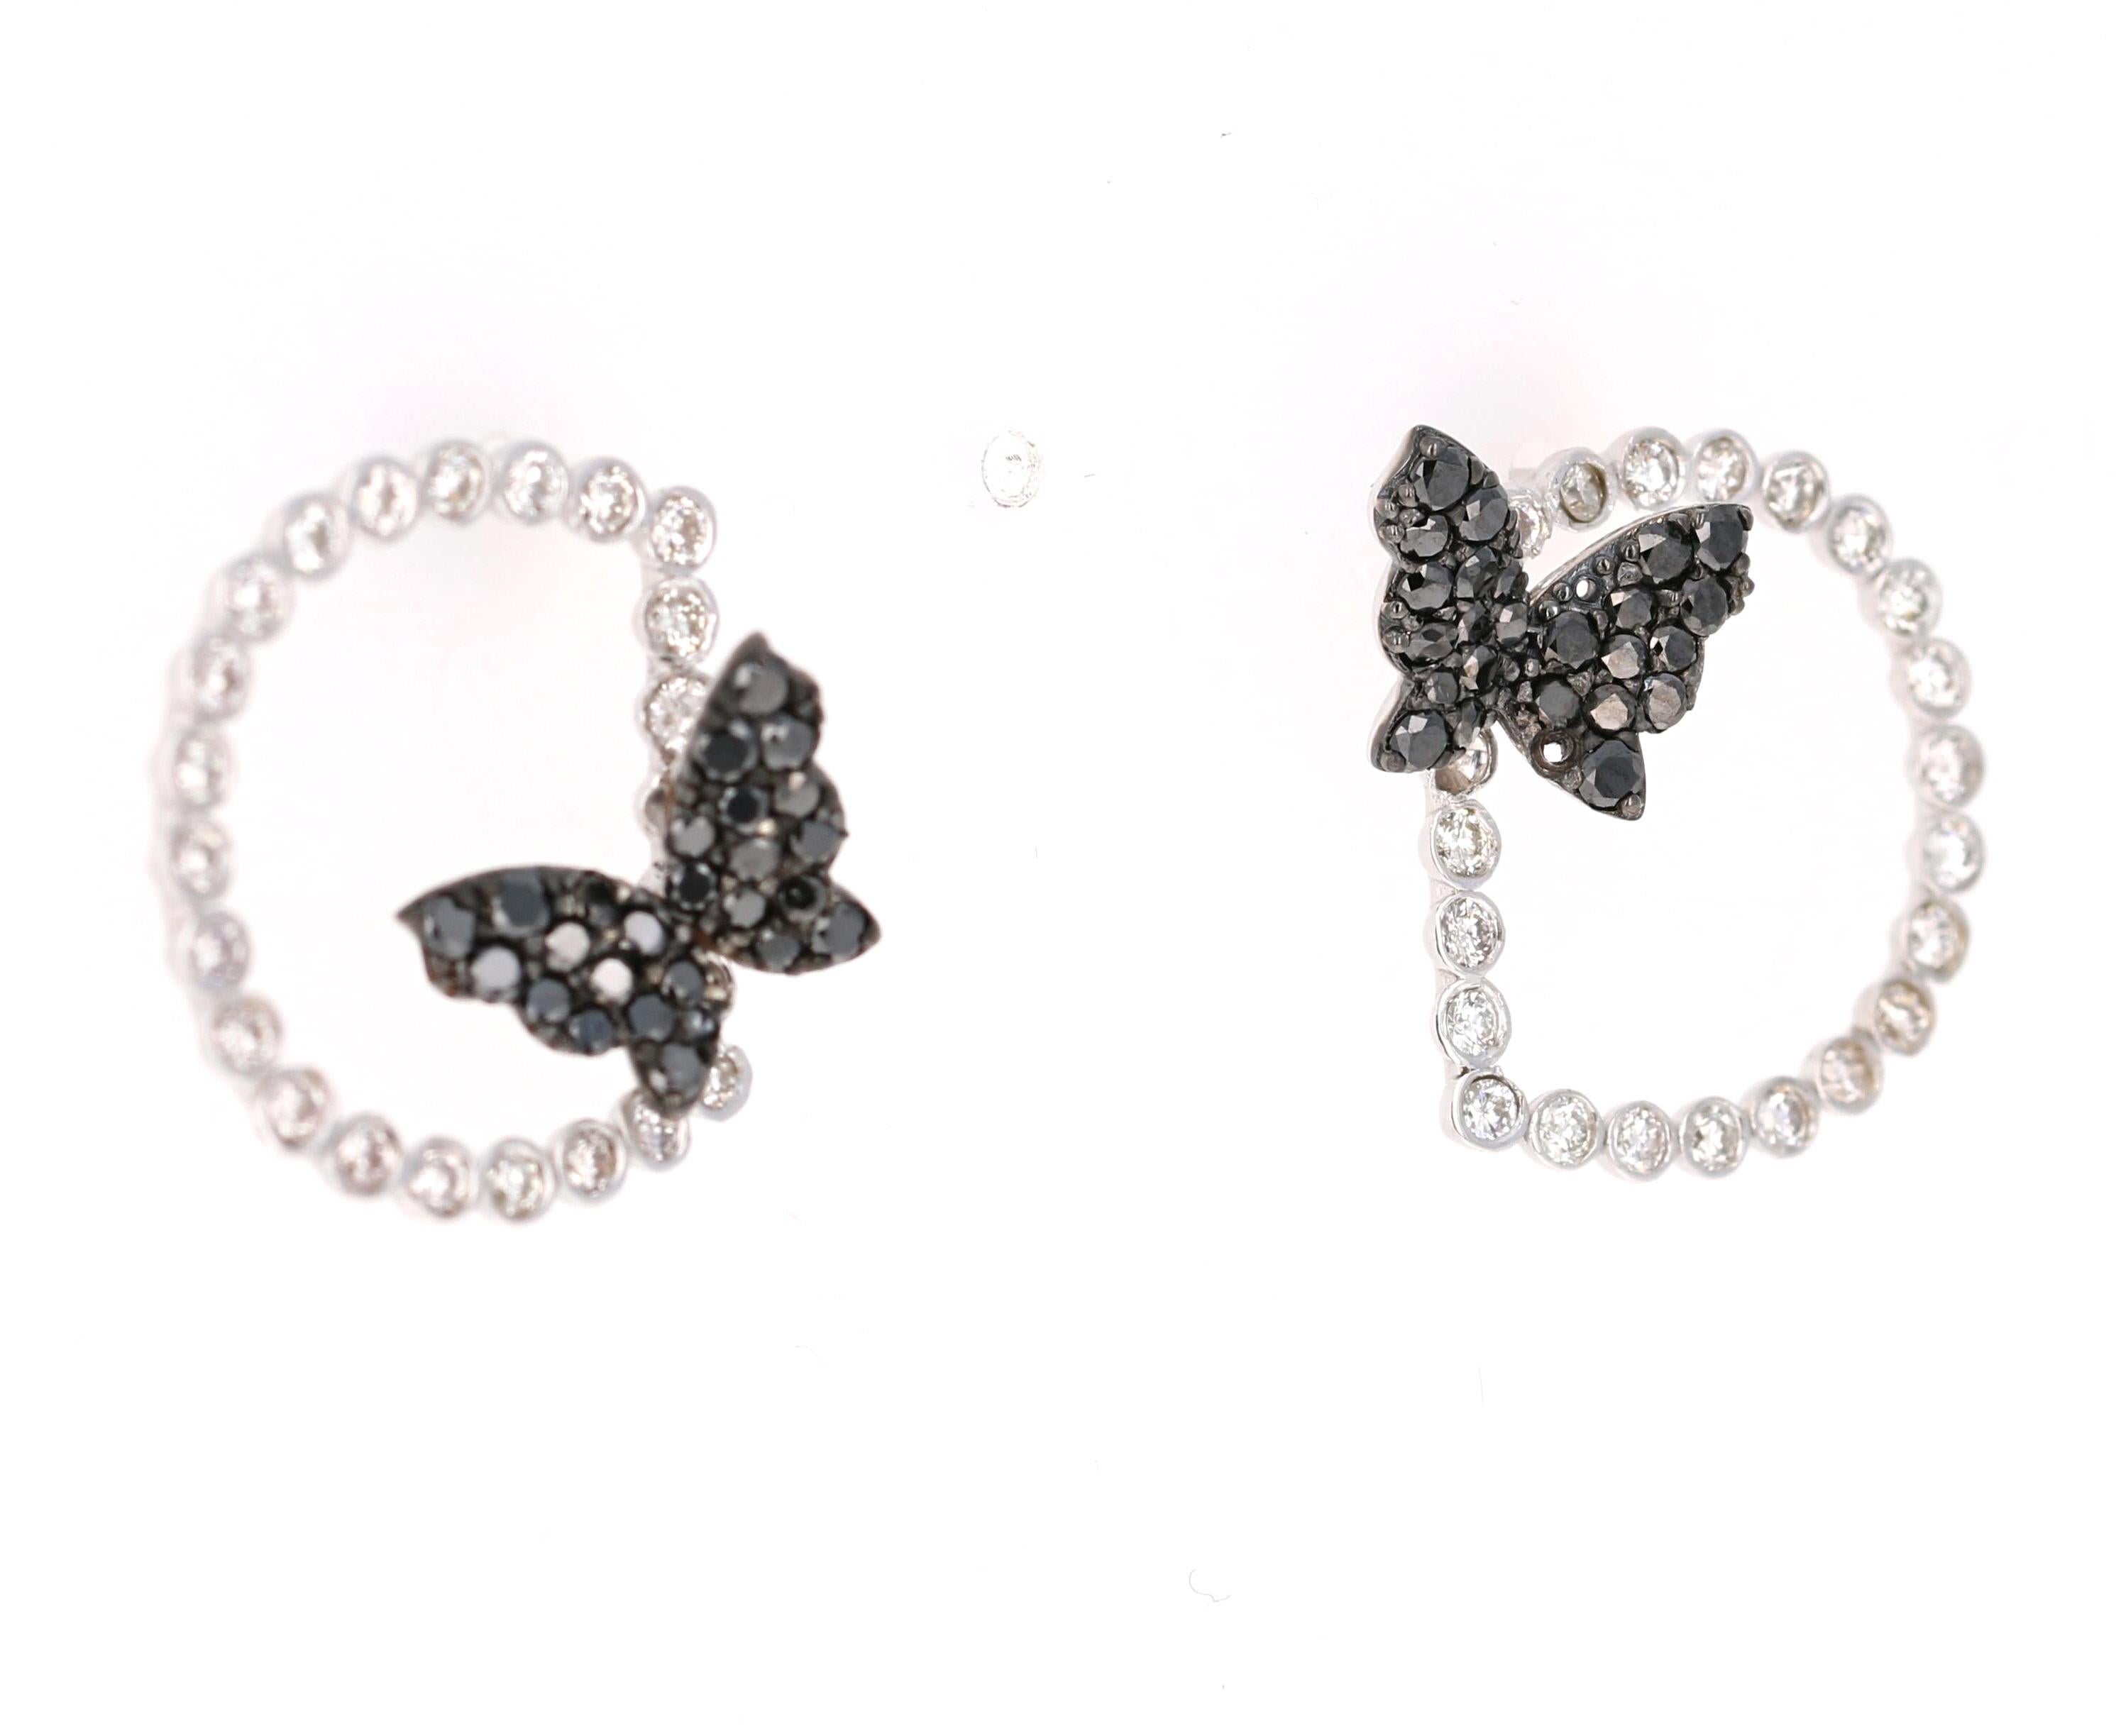 1.68 Carat Black Diamond Butterfly 14 Karat White Gold Earrings

Beautiful Black Diamond and White Diamond Butterfly Earrings in 14K White Gold.  This design has 46 Round Cut Diamonds that weigh 0.83 carats (Clarity: VS2, Color: H) and 52 Black